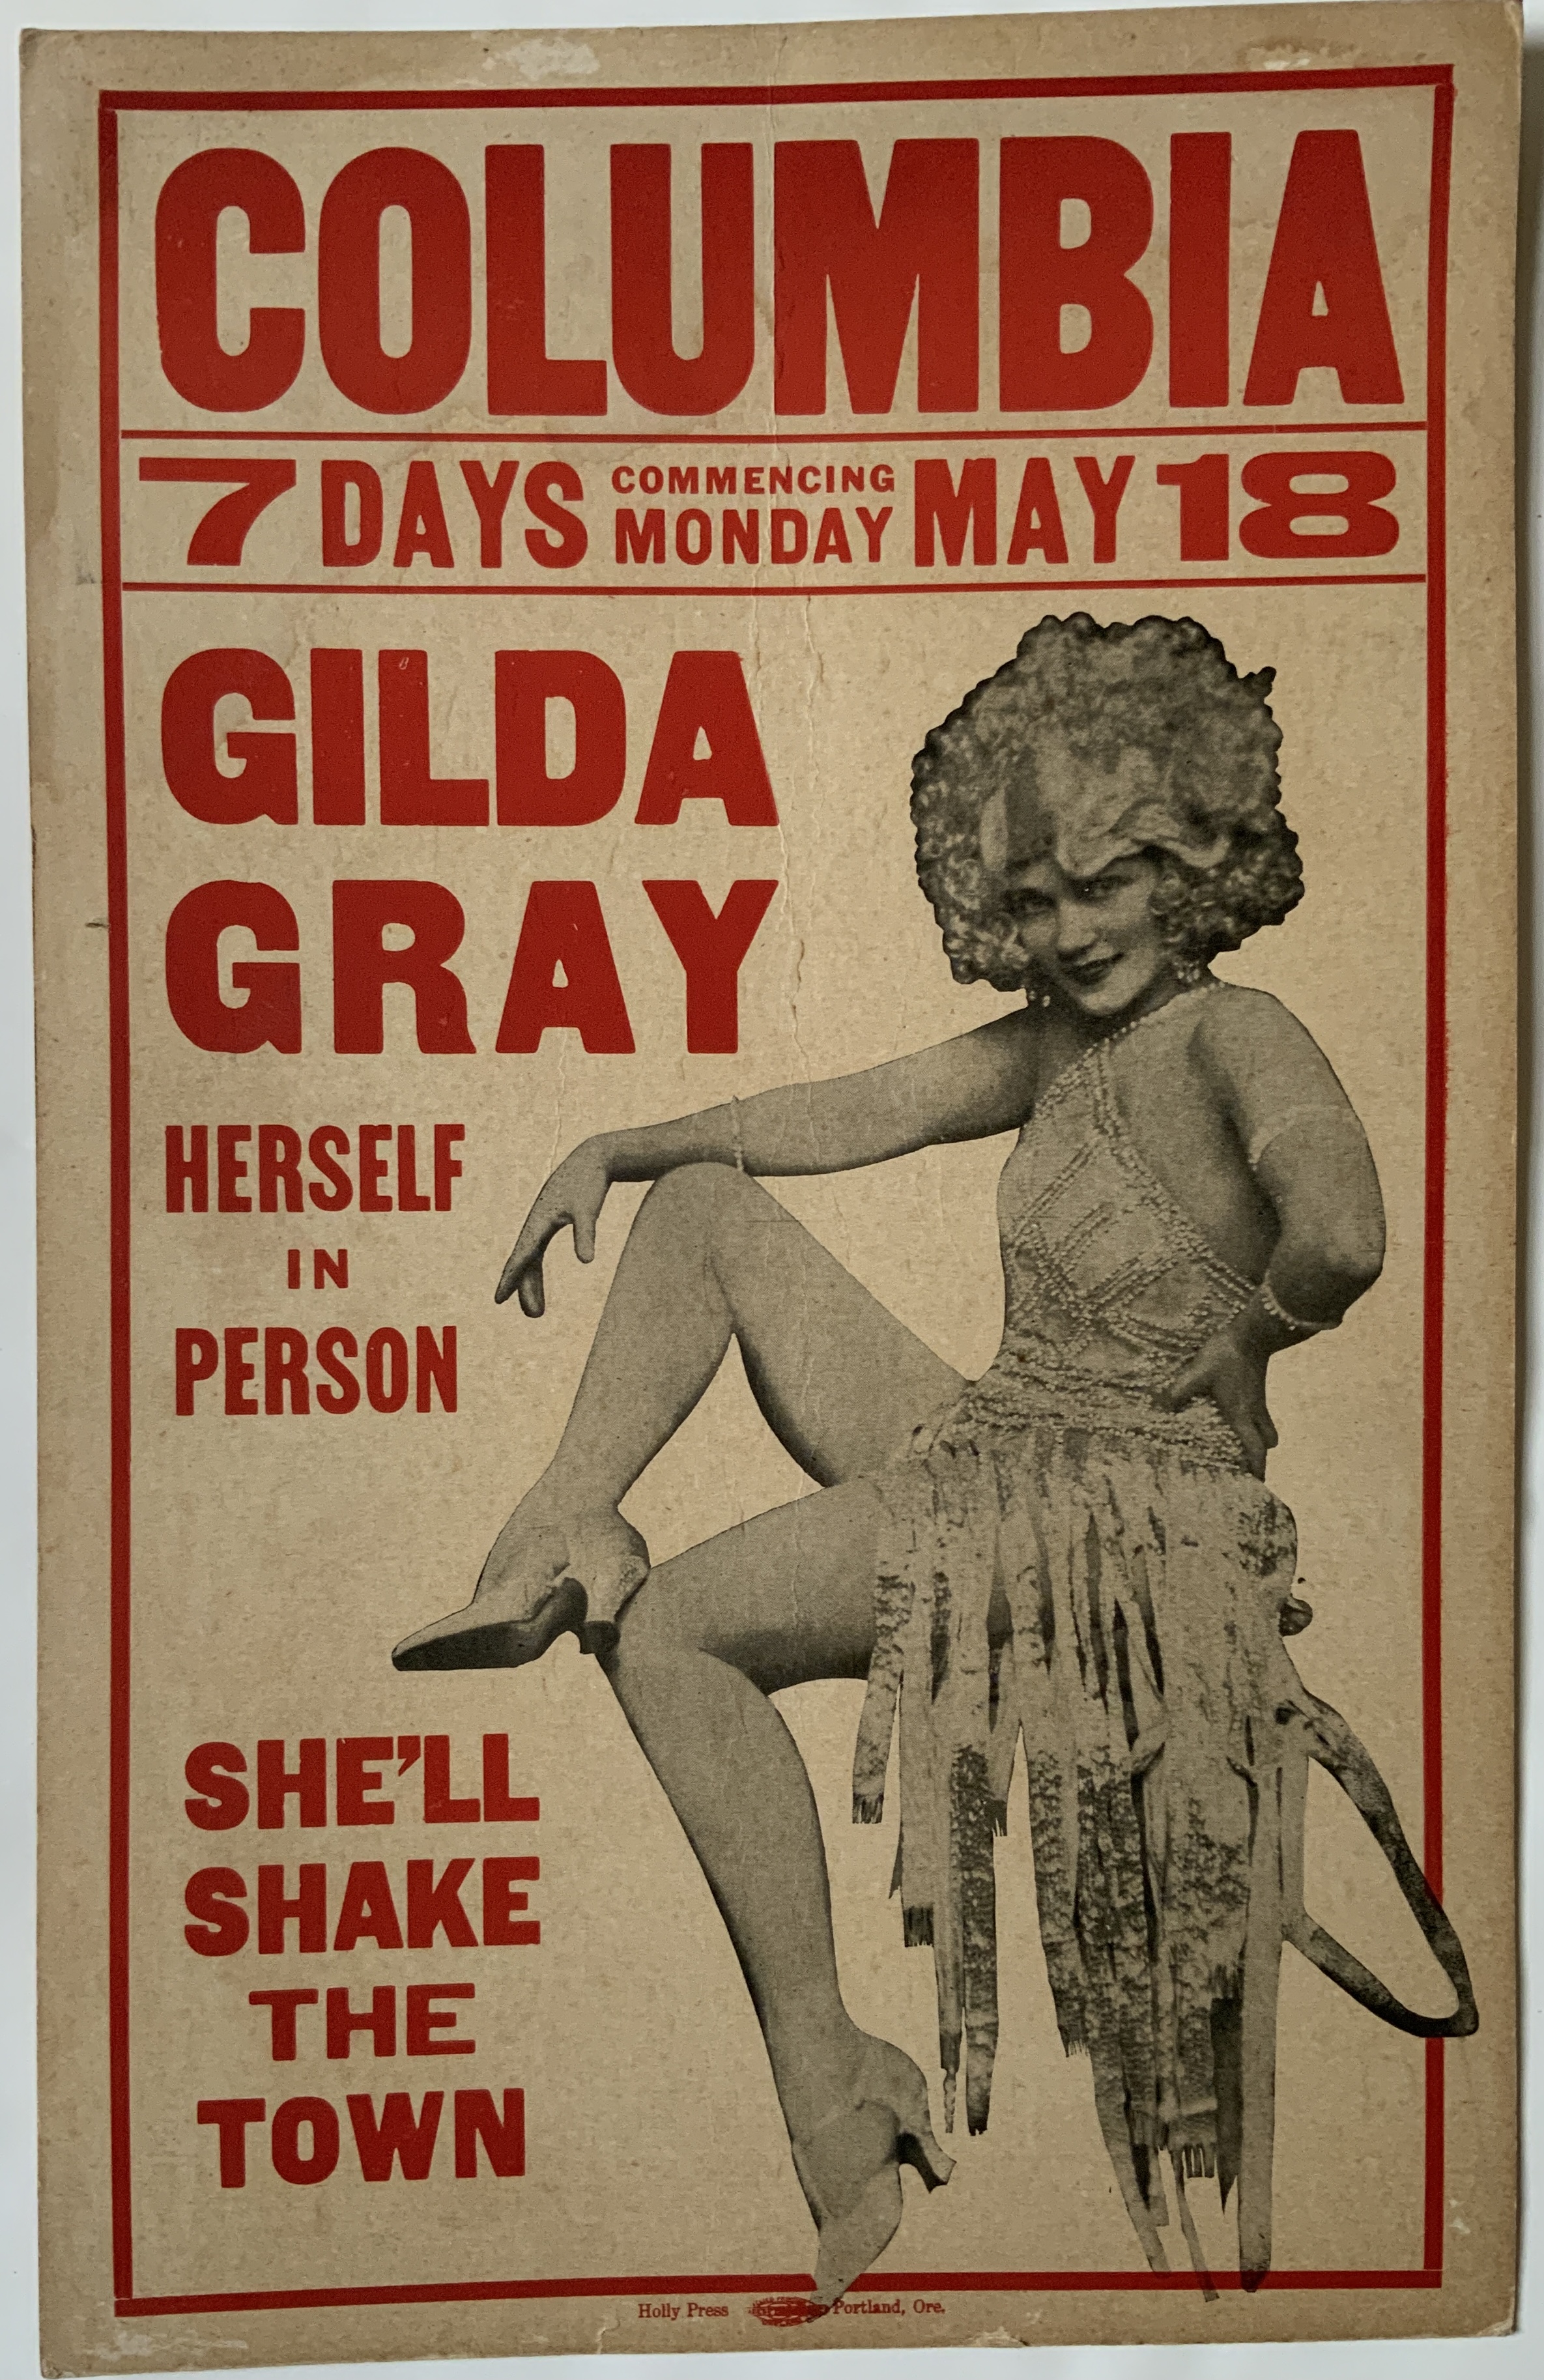 J908	GILDA GRAY - HERSELF IN PERSON - SHE’LL SHAKE THE TOWN CA. 1925